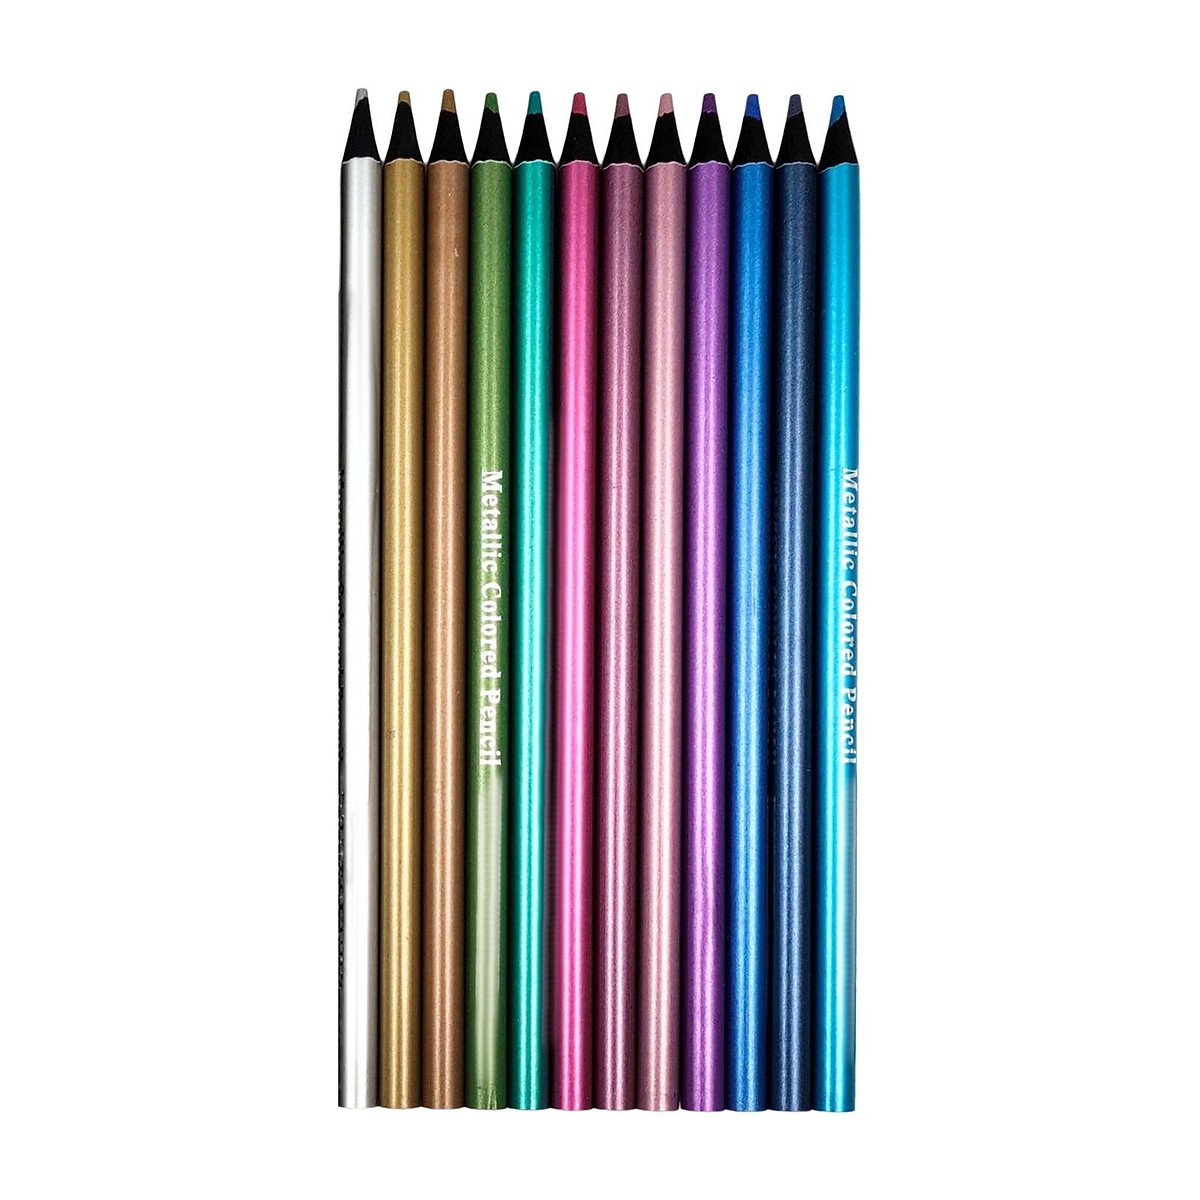 Professional Drawing Artist Kit Set Pencils and Sketch - Etsy